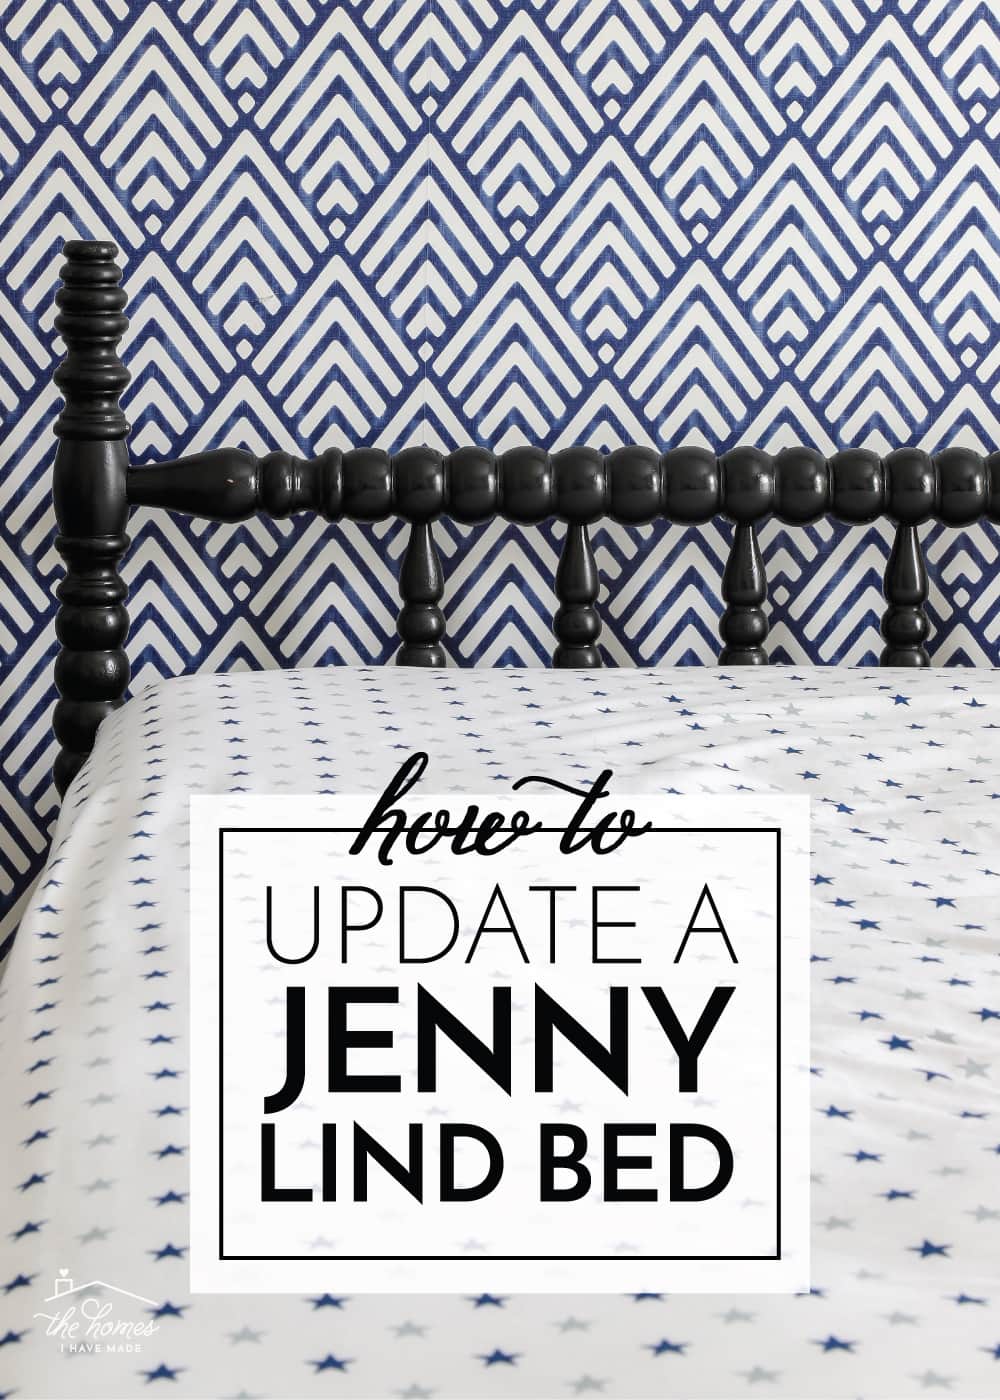 How to Update a Jenny Lind Bed